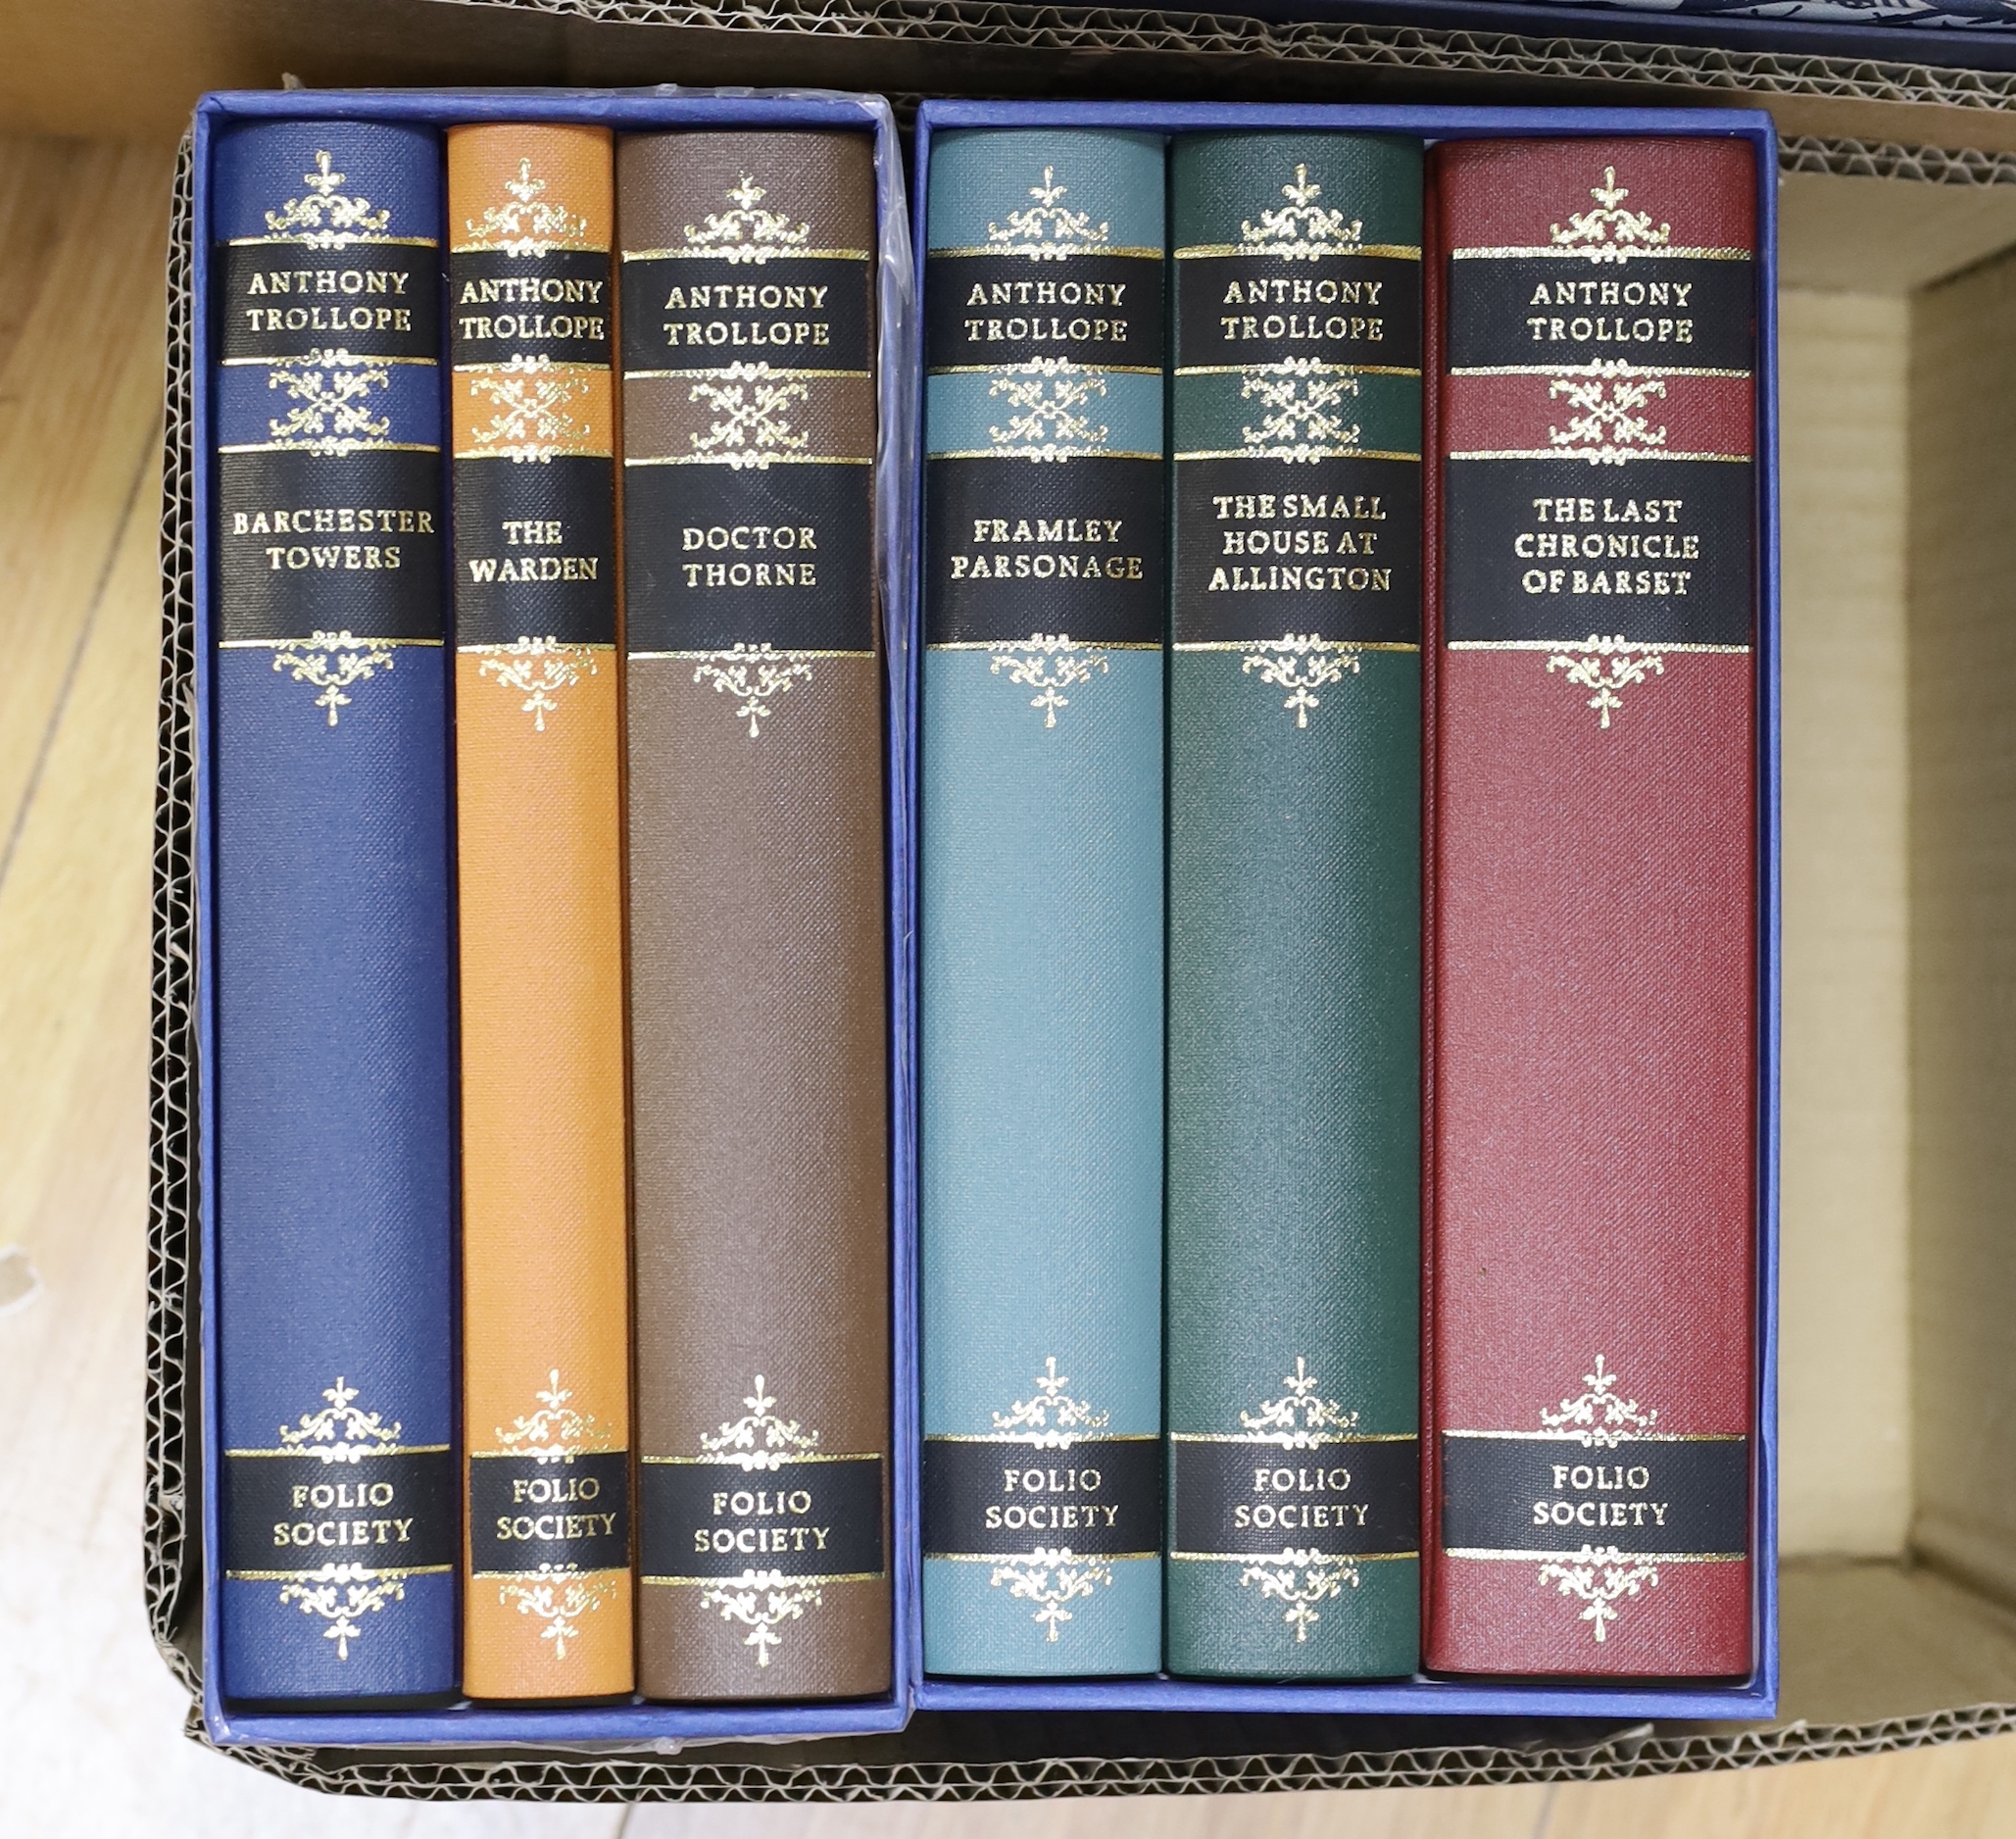 Folio Society - A Miscellany collection, boxed or slipcased including, six works by Anthony Trollope, Brief Lives by John Aubrey and Englands Constable (21)